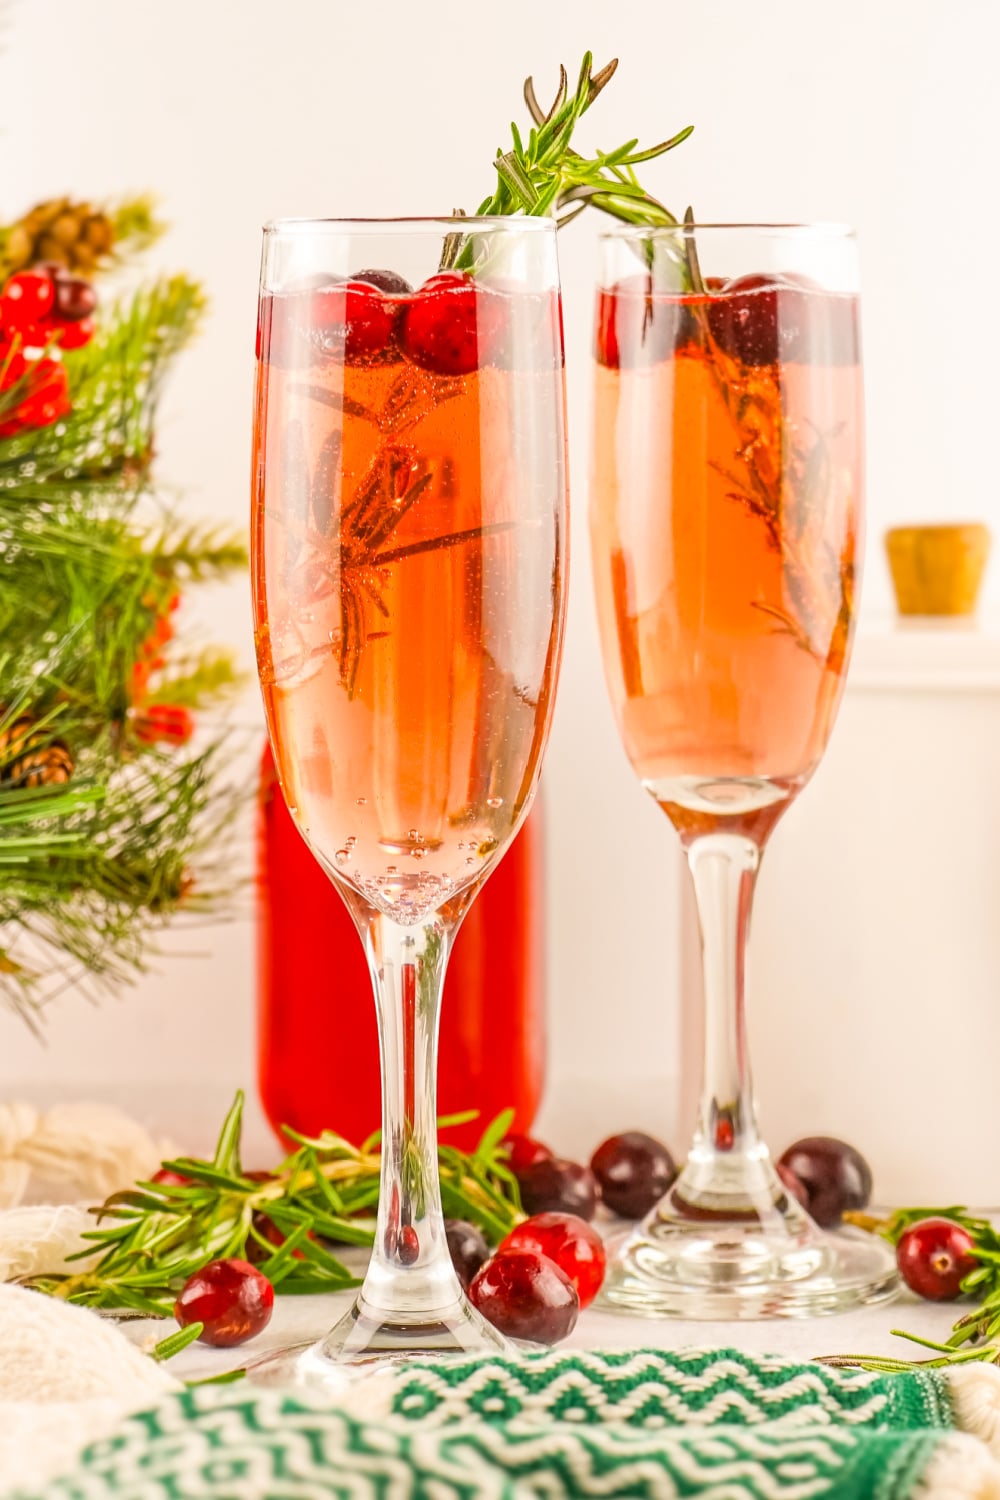 Two champagne flutes filled with Cranberry Mimosa garnished with rosmary.